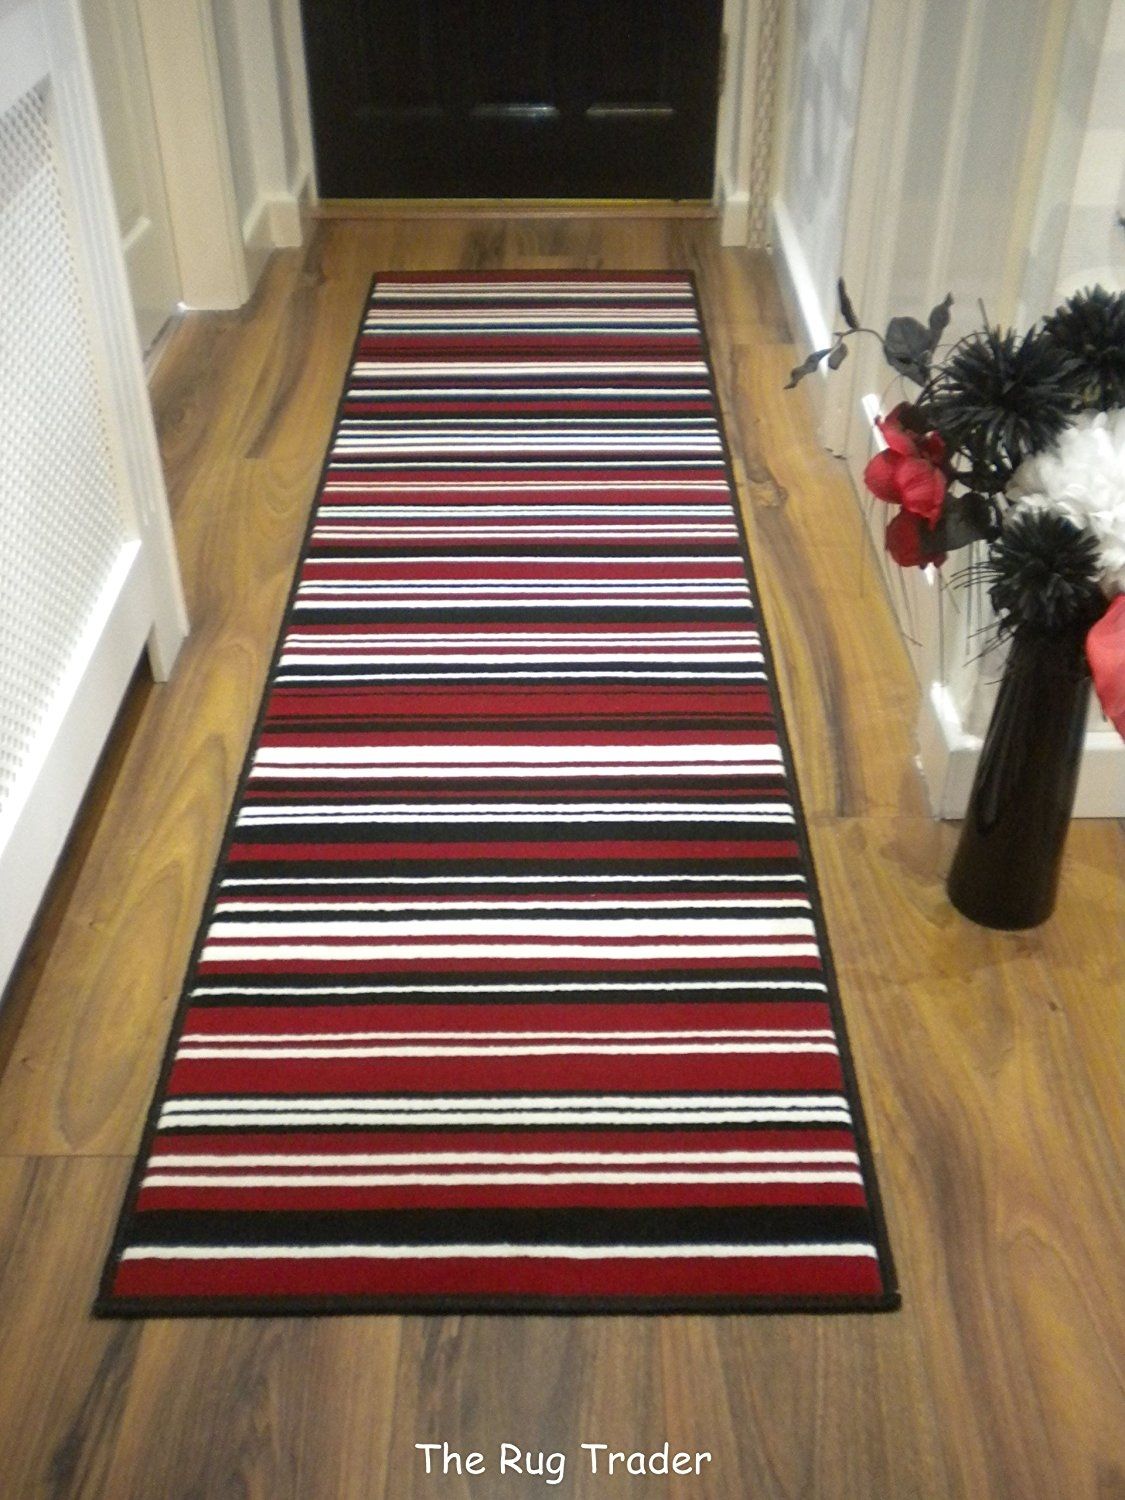 Modern Stripe Rug Red Black Hall Runner 60cm X 220cm Amazoncouk With Regard To Hall Runners And Rugs (View 15 of 20)